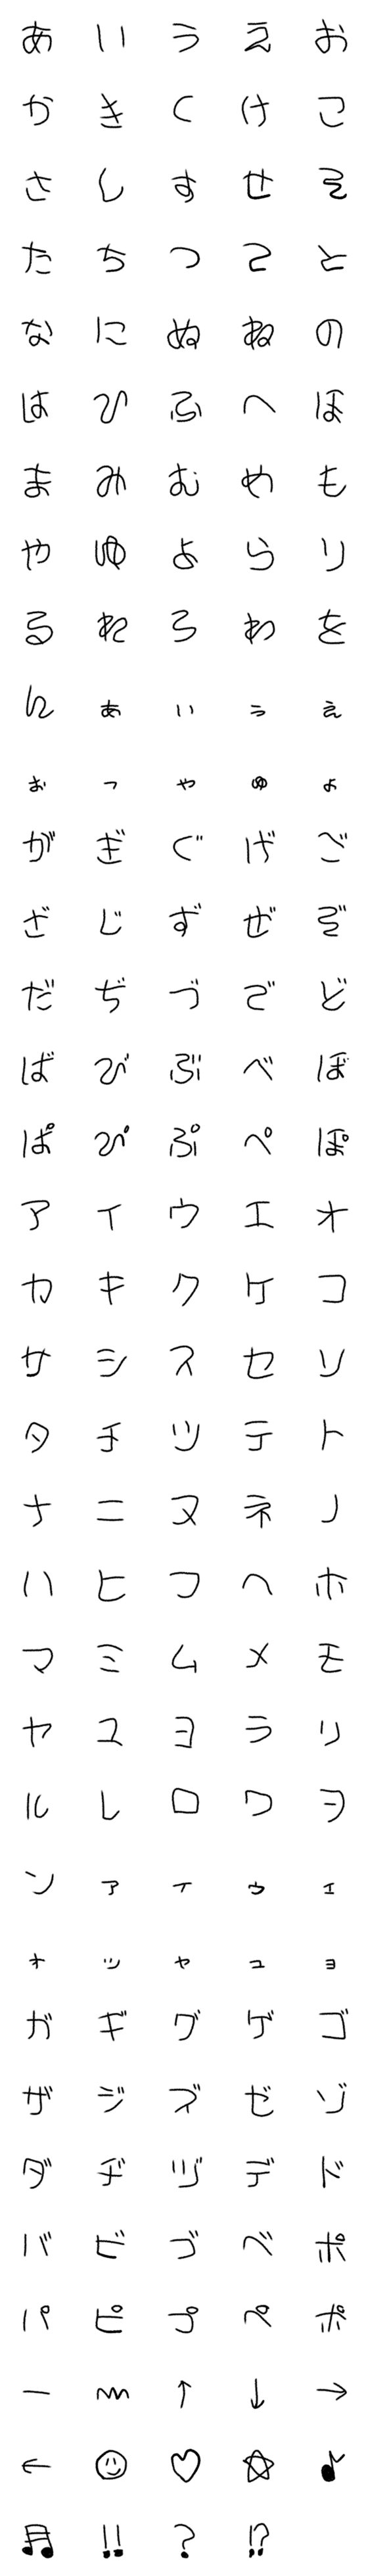 [LINE絵文字]へたくそな字の画像一覧